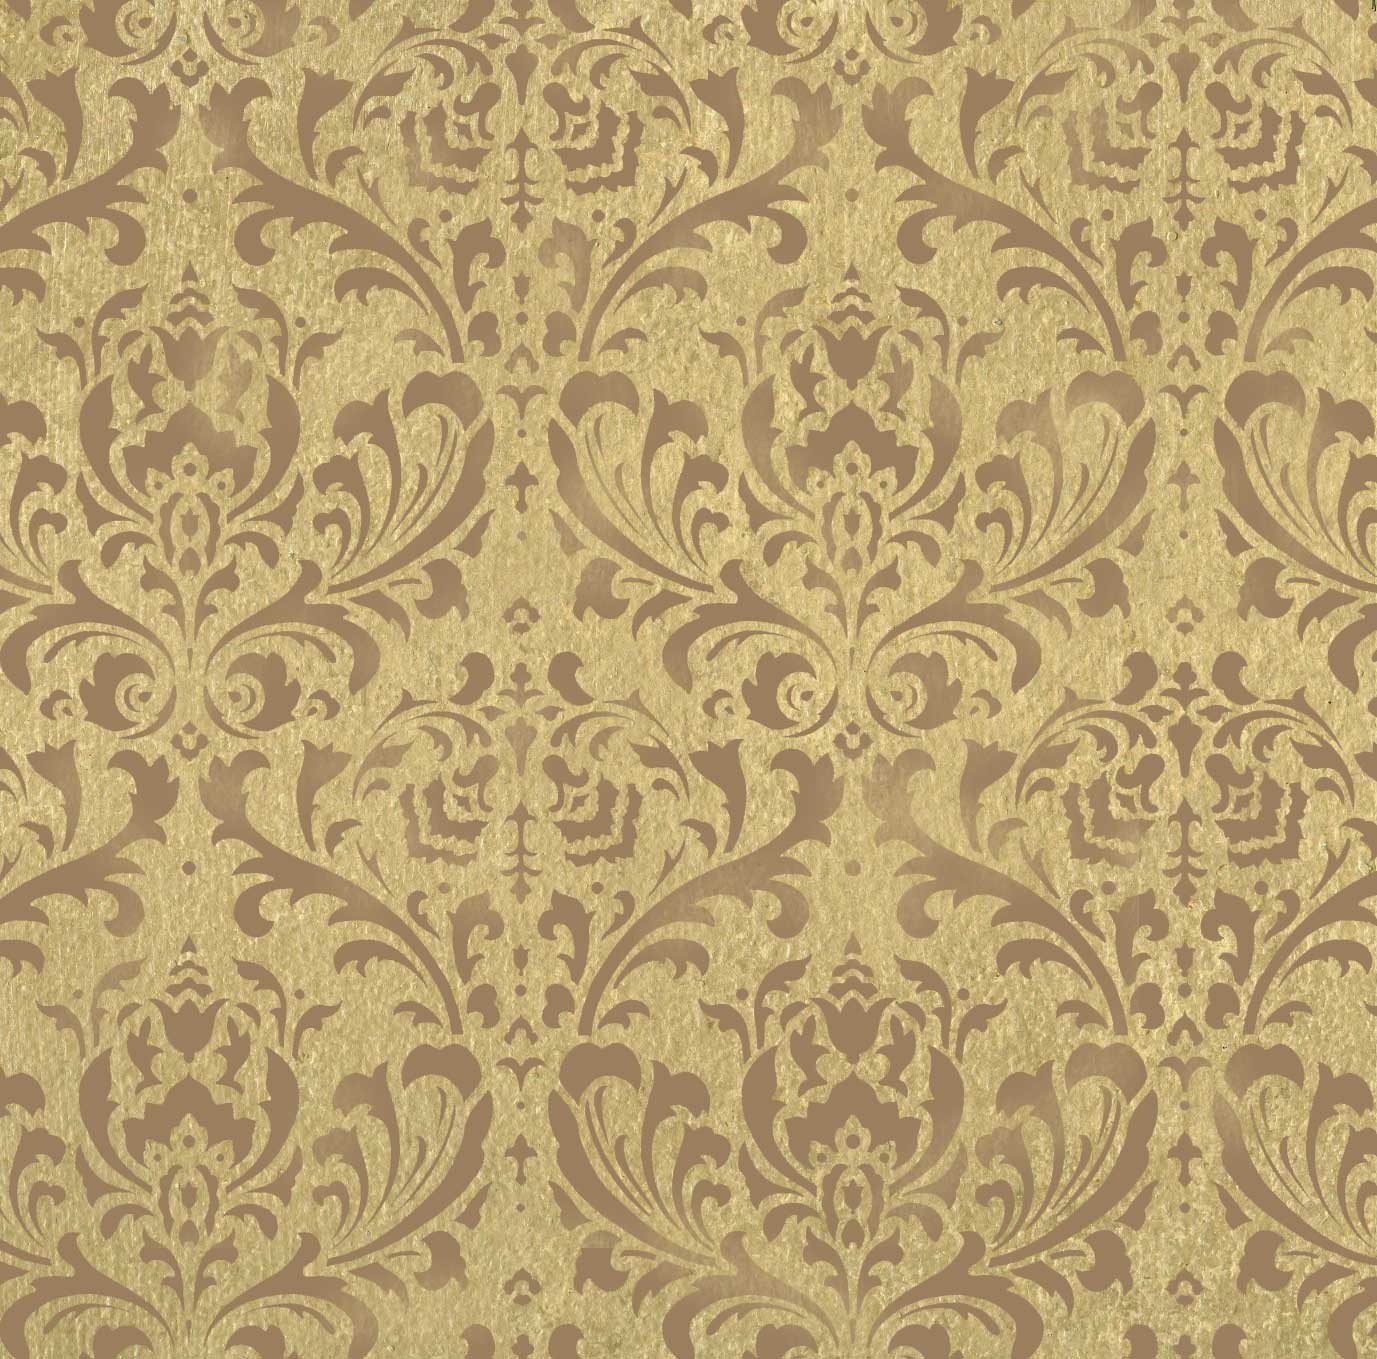 Damask Brocade Pattern Wallpaper Stenciling Wall Decor Picture